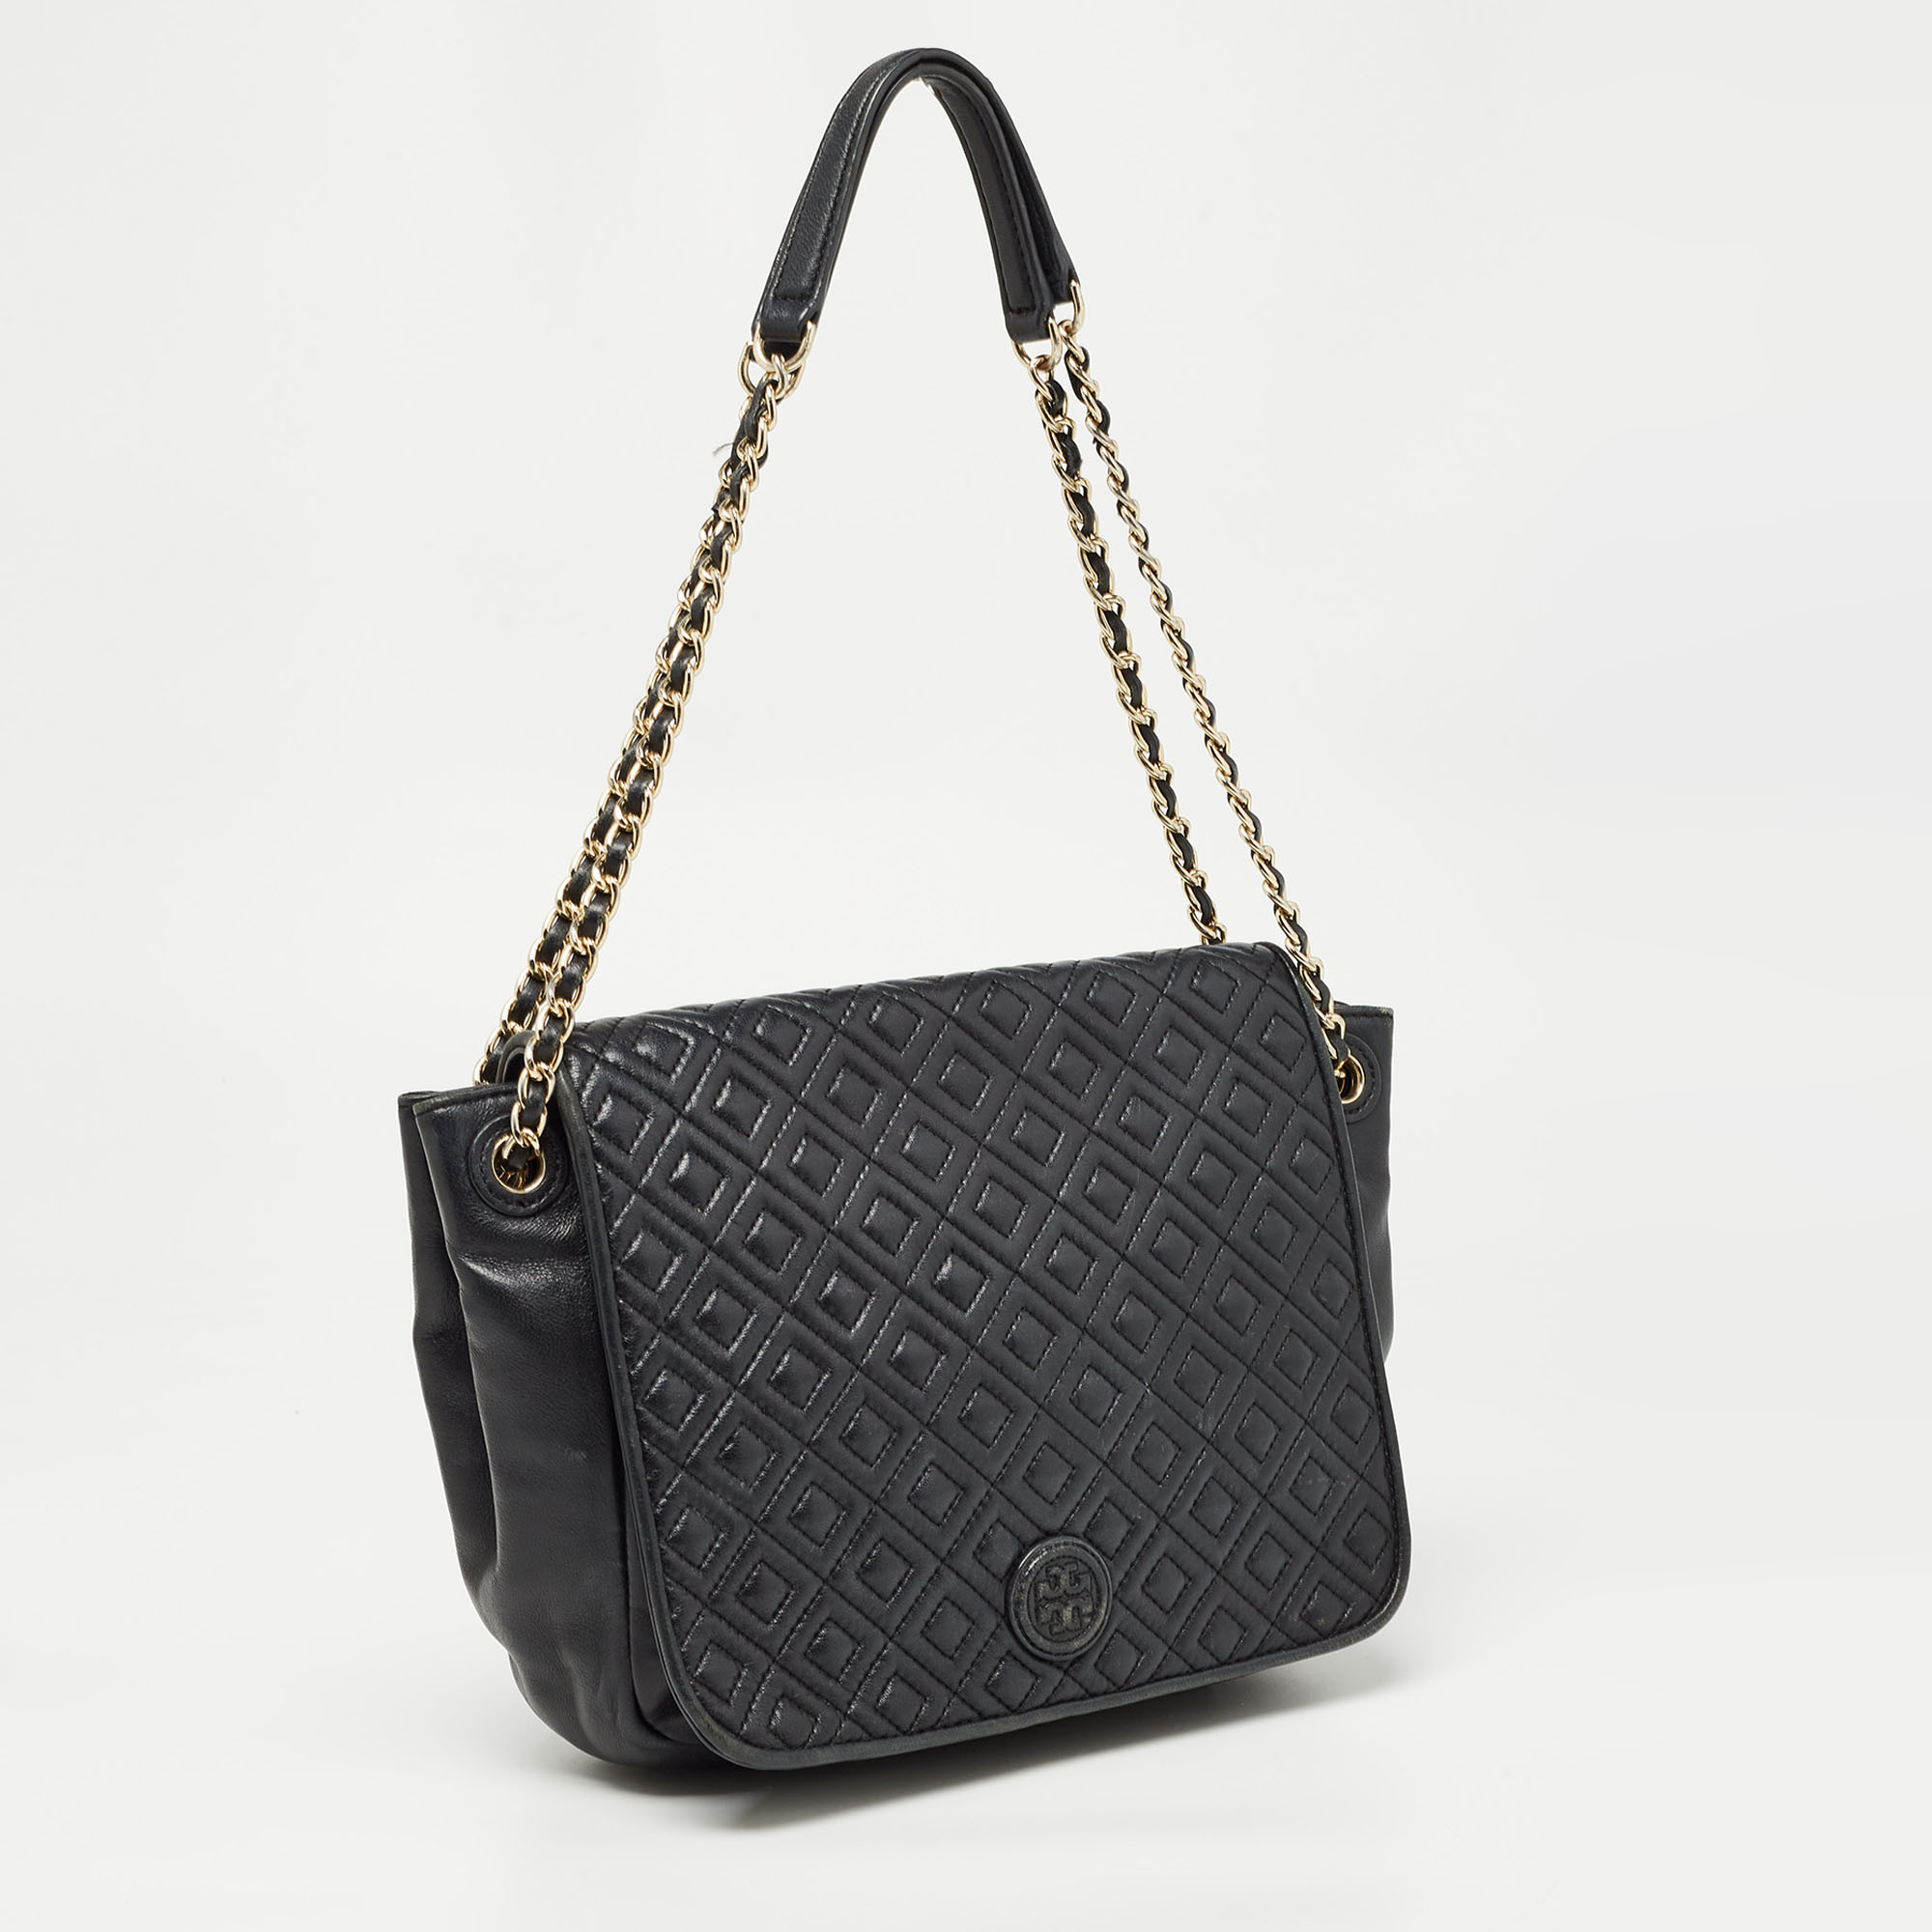 Tory Burch Black Quilted Leather Marion Flap Chain Shoulder Bag